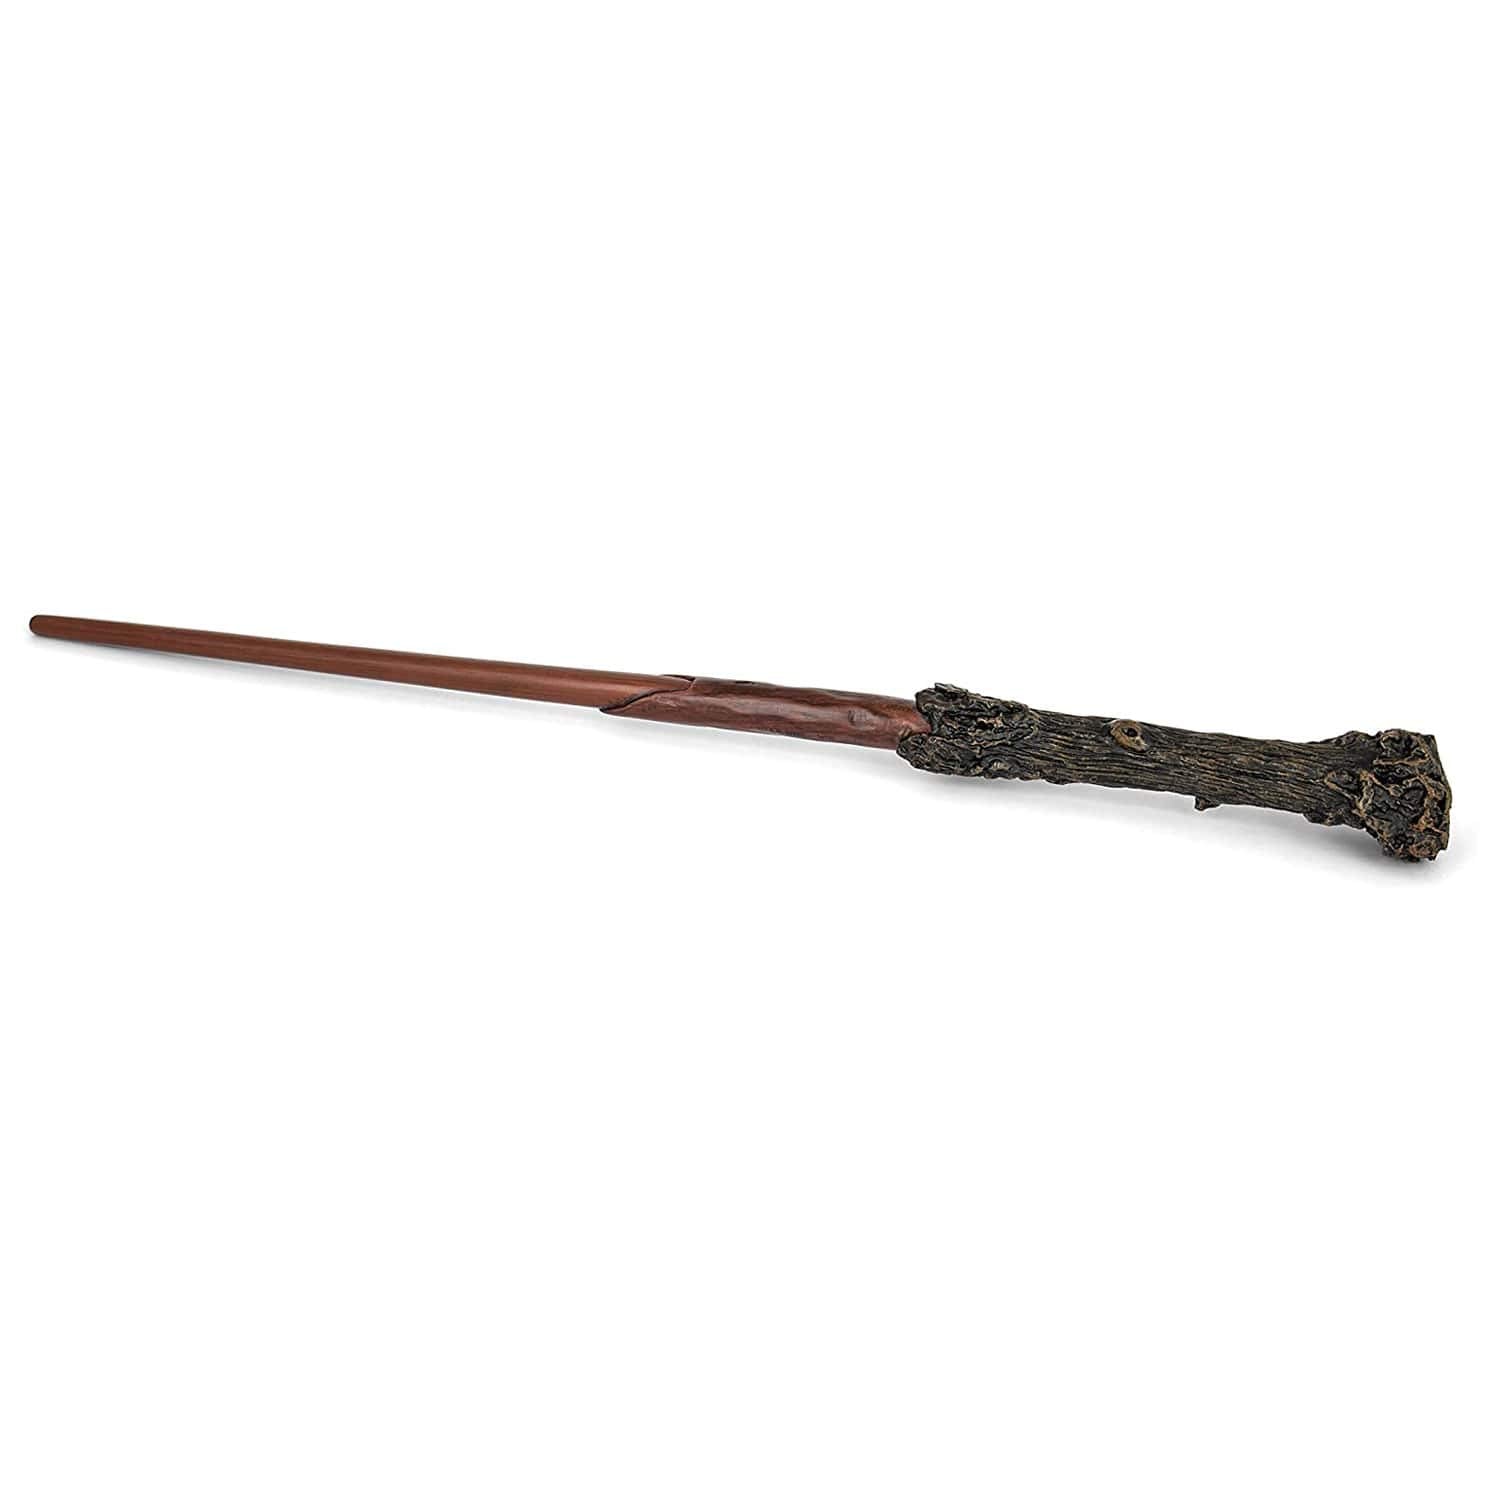 The Noble Collection Harry Potter Wand with Ollivanders Wand Box